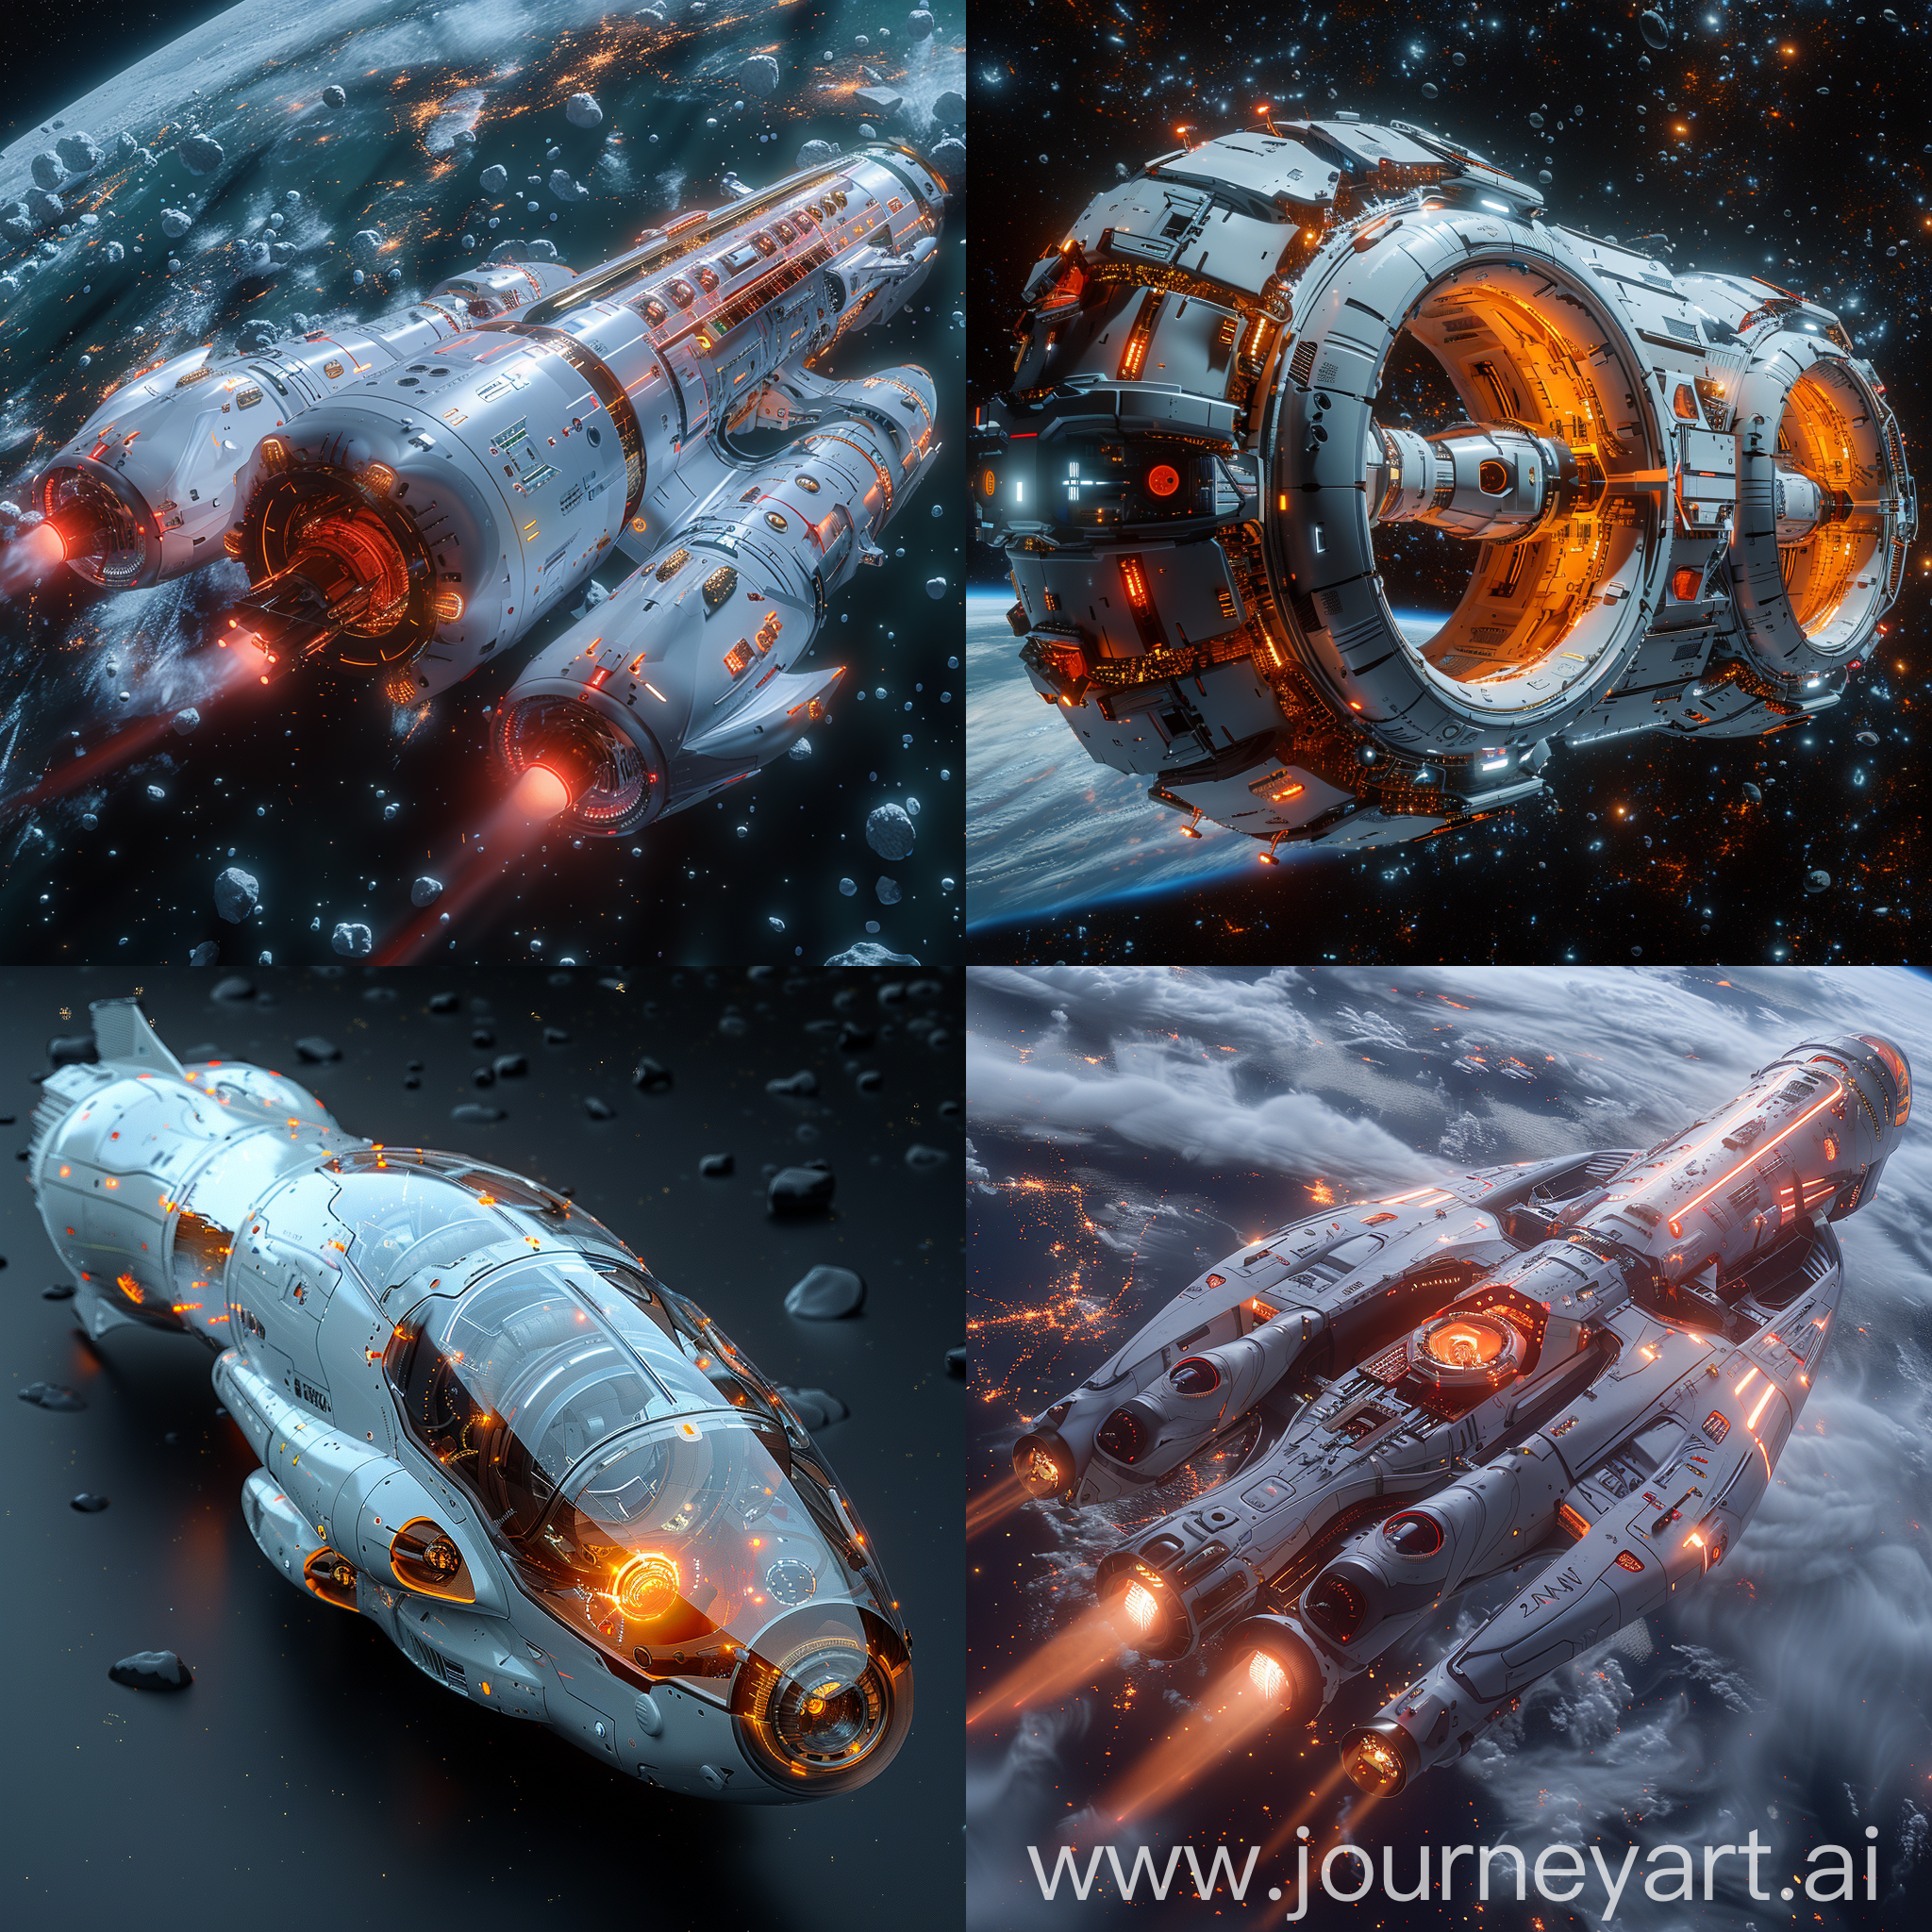 Ultramodern, futuristic rocket, Morphing, self-repairing hull, Plasma propulsion drive, Artificial gravity ring, Closed-loop life support system, Advanced AI navigation, Modular design, Holographic communication, Onboard 3D printing, Interstellar dust collection system, Interstellar highway network, octane render --stylize 1000